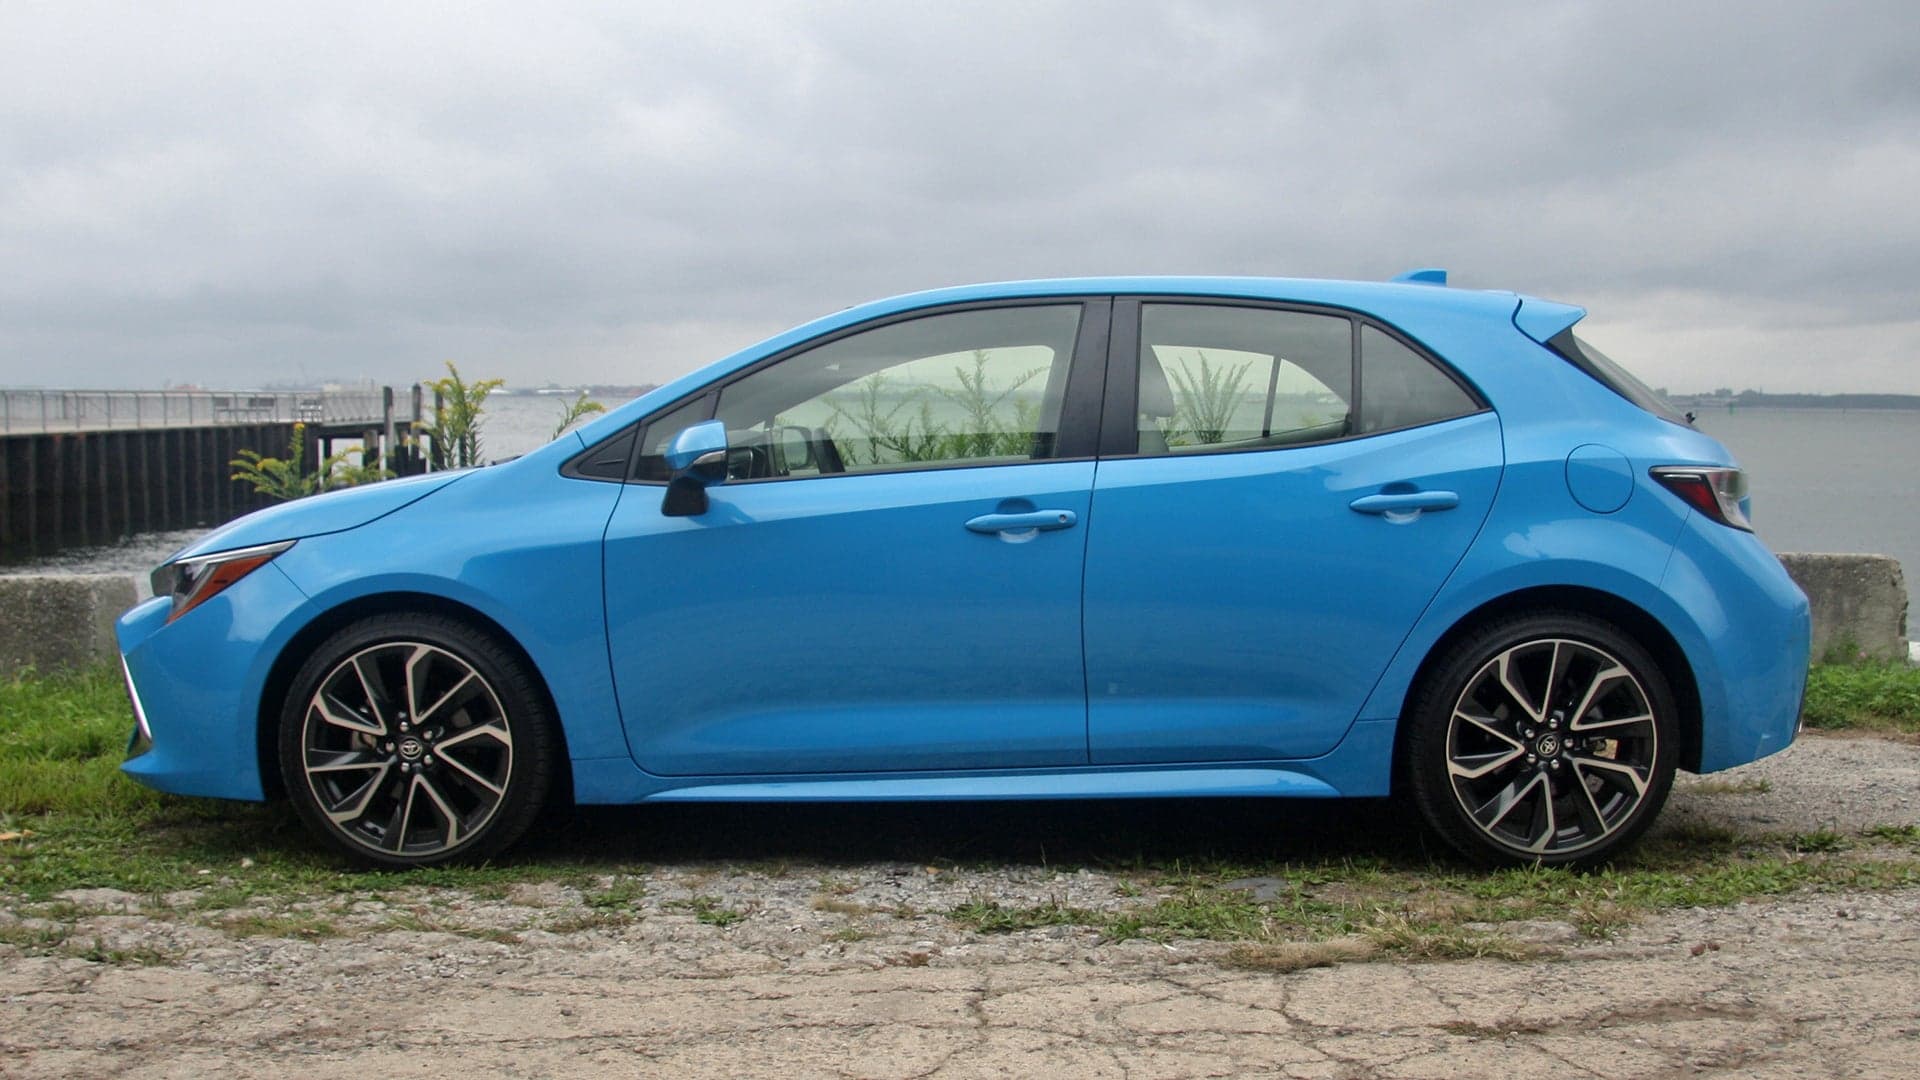 2019 Toyota Corolla Hatchback XSE New Dad Review: Stylish, But Awfully Small for Family Matters